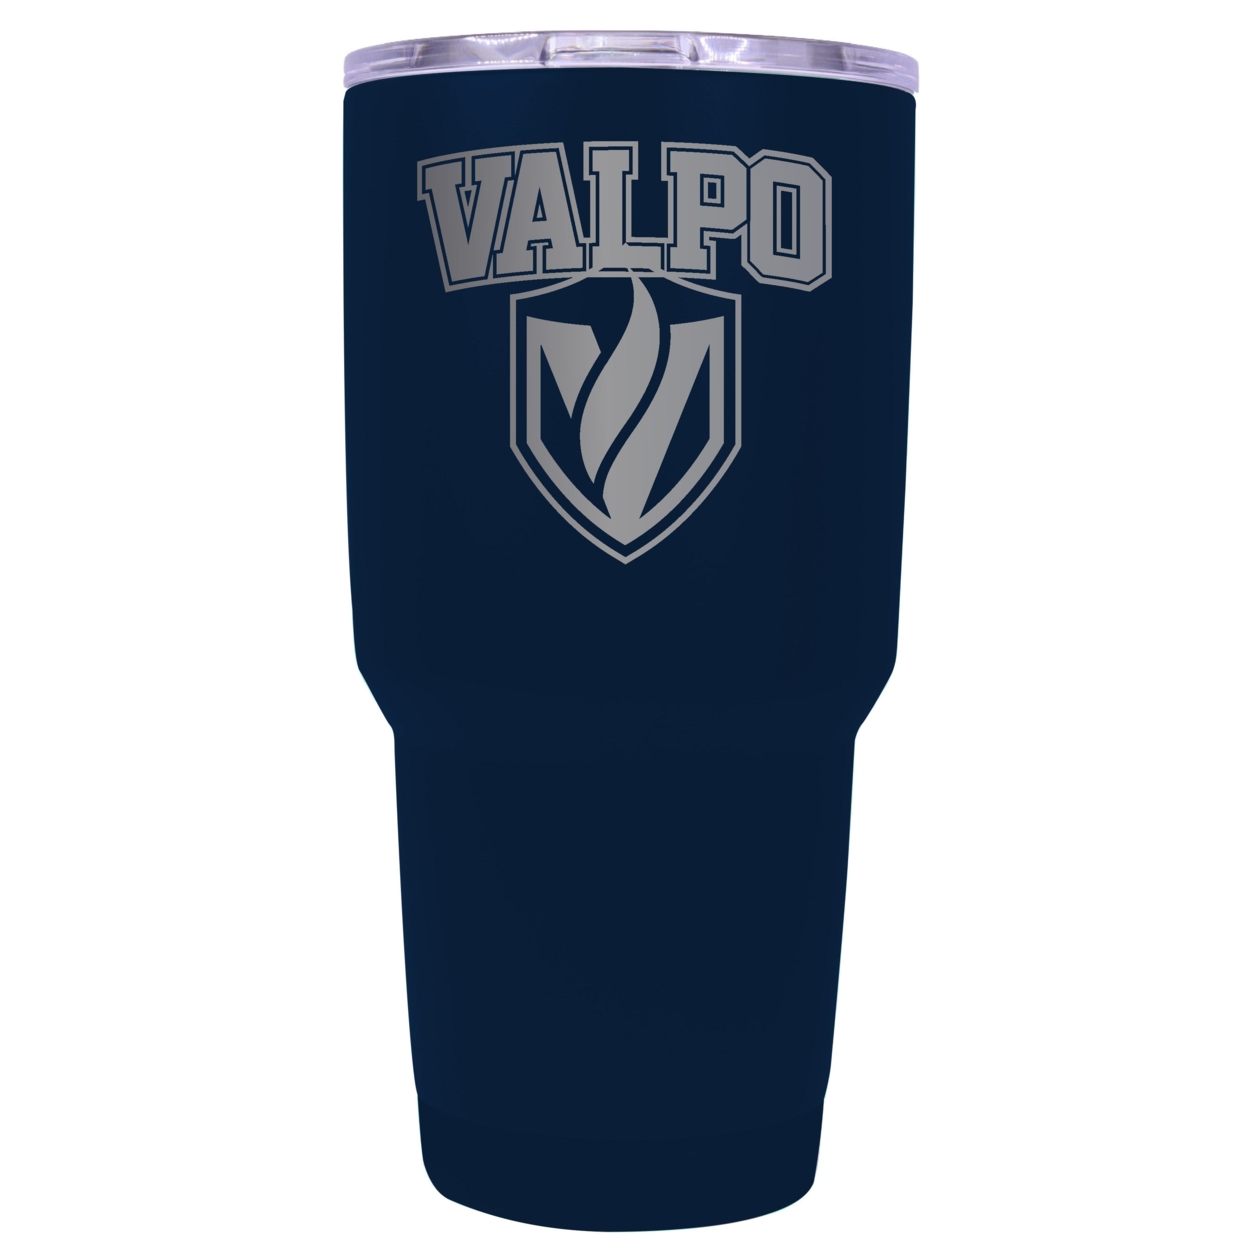 Valparaiso University 24 Oz Laser Engraved Stainless Steel Insulated Tumbler - Choose Your Color. - Red